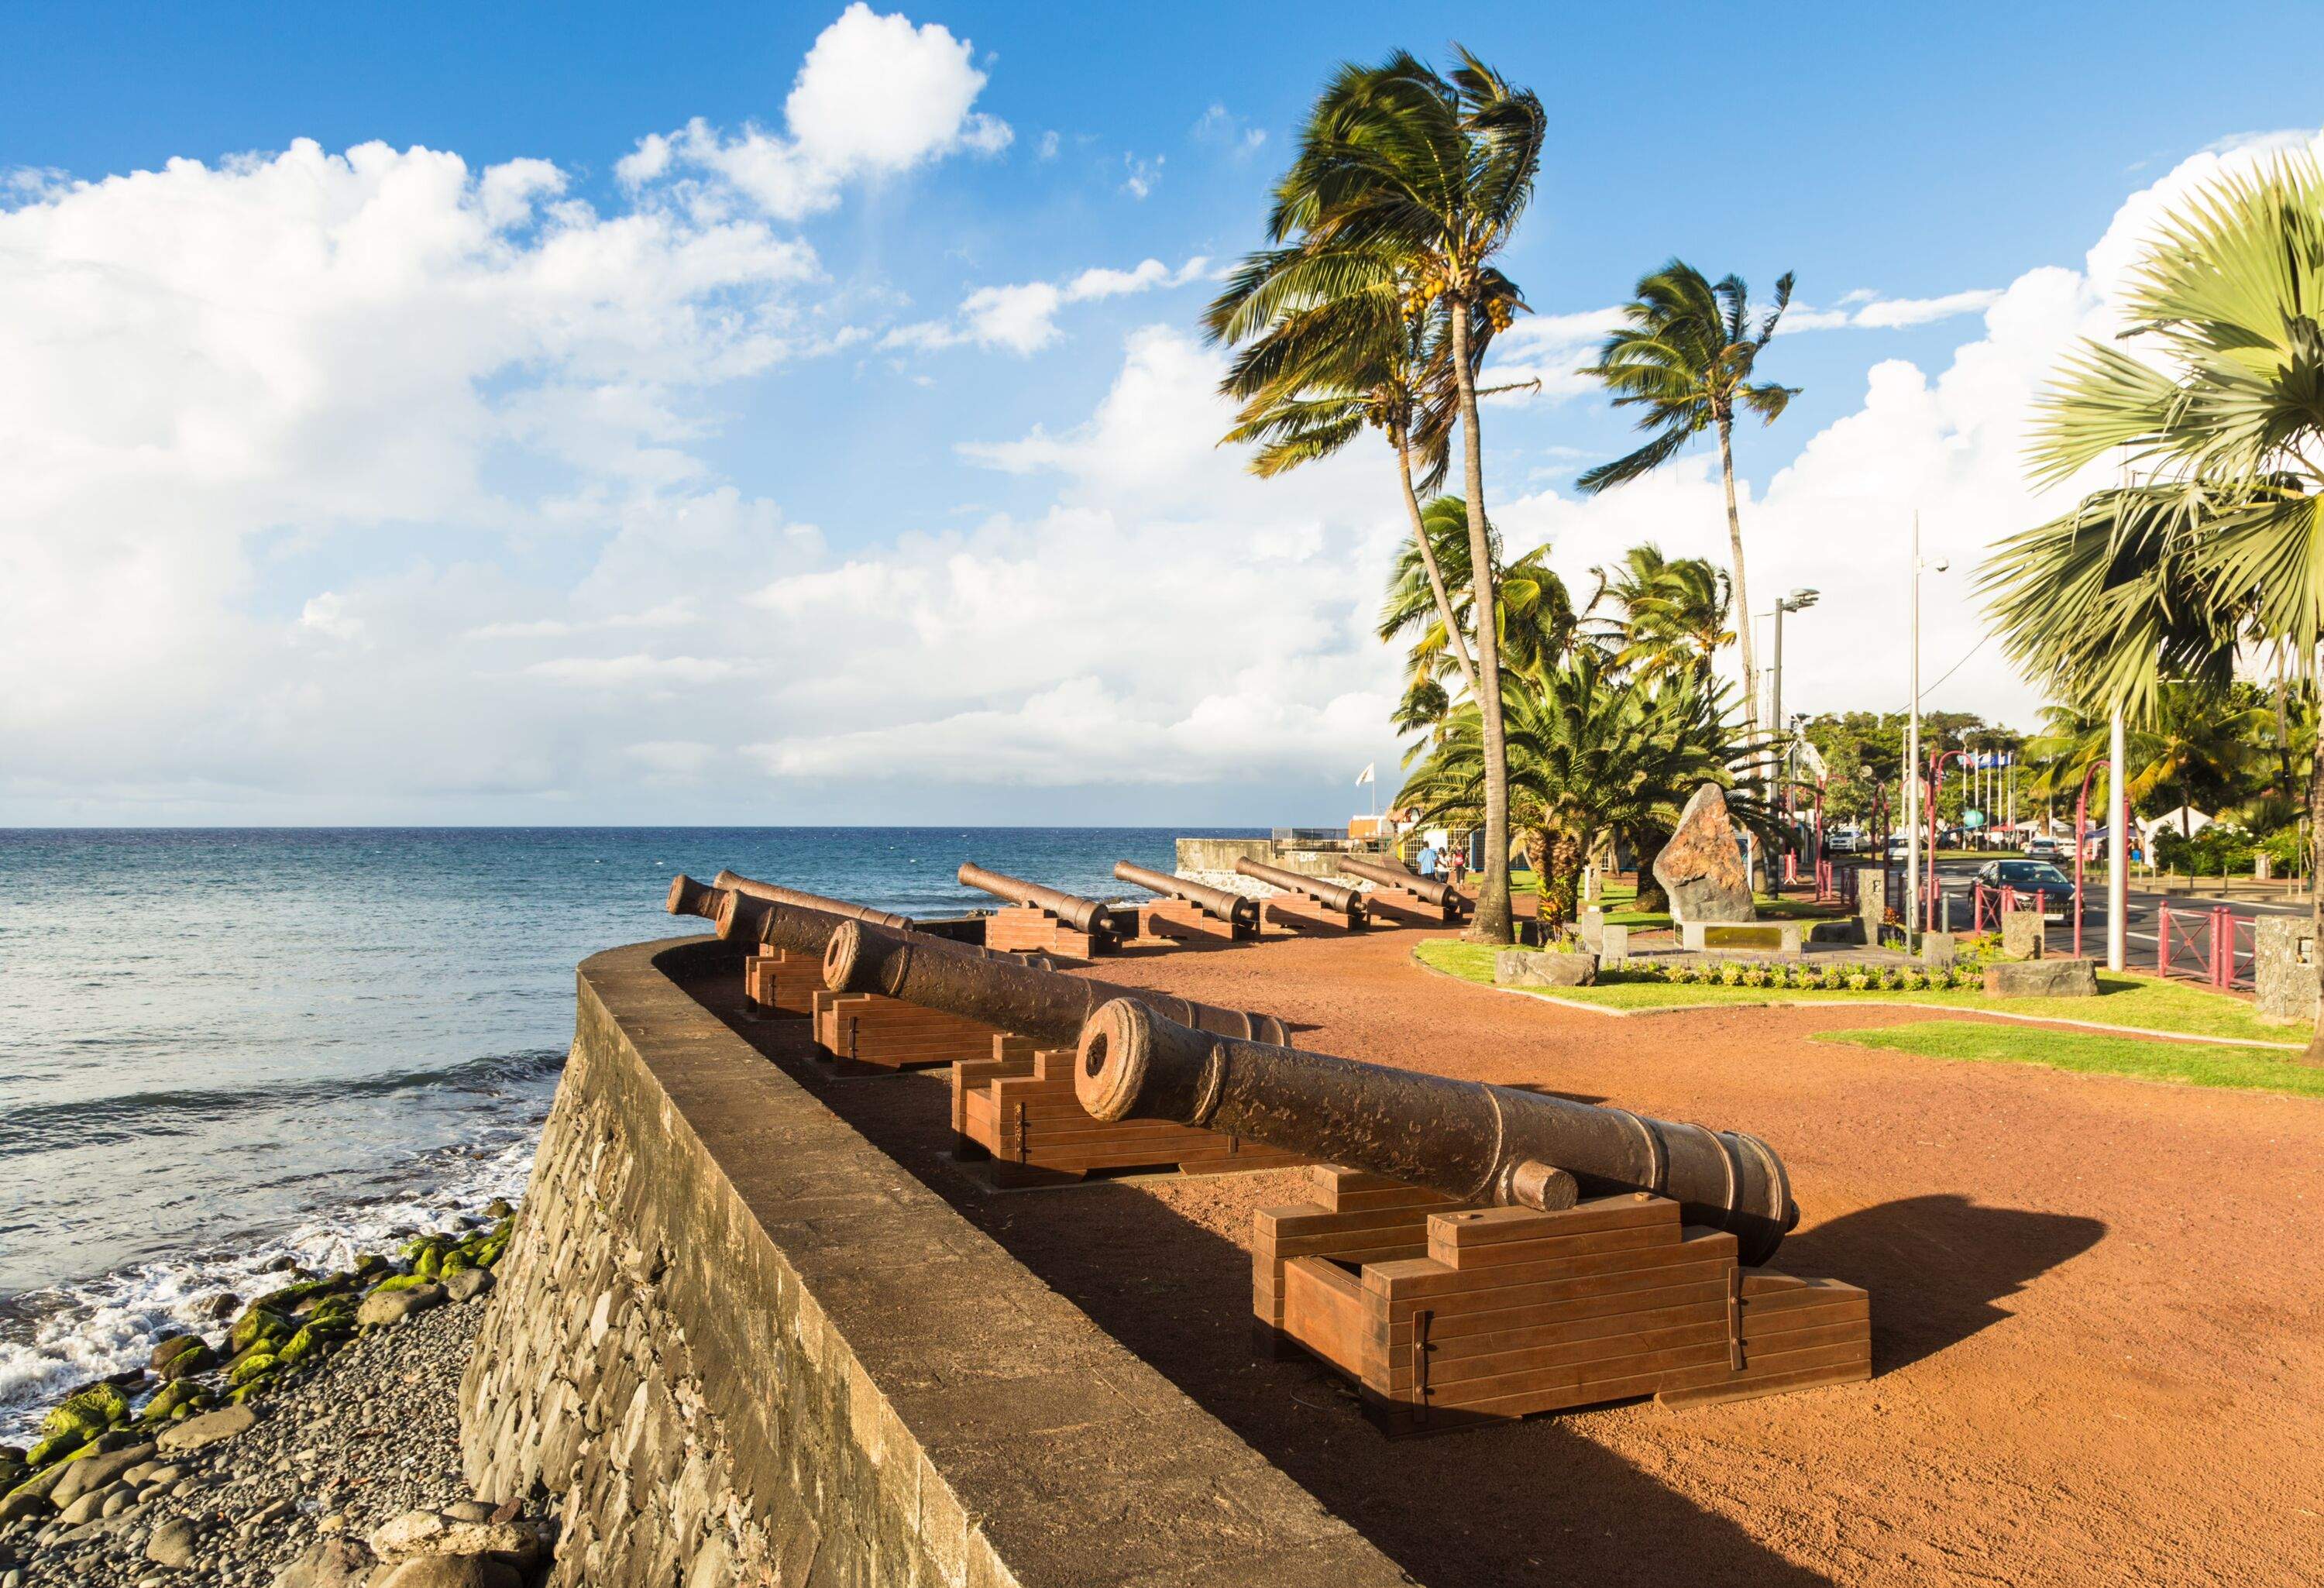 Old bronze canons displayed on the waterfront promenade along the Indian ocean in Saint Denis, the capital city of the Reunion island, which belongs to France